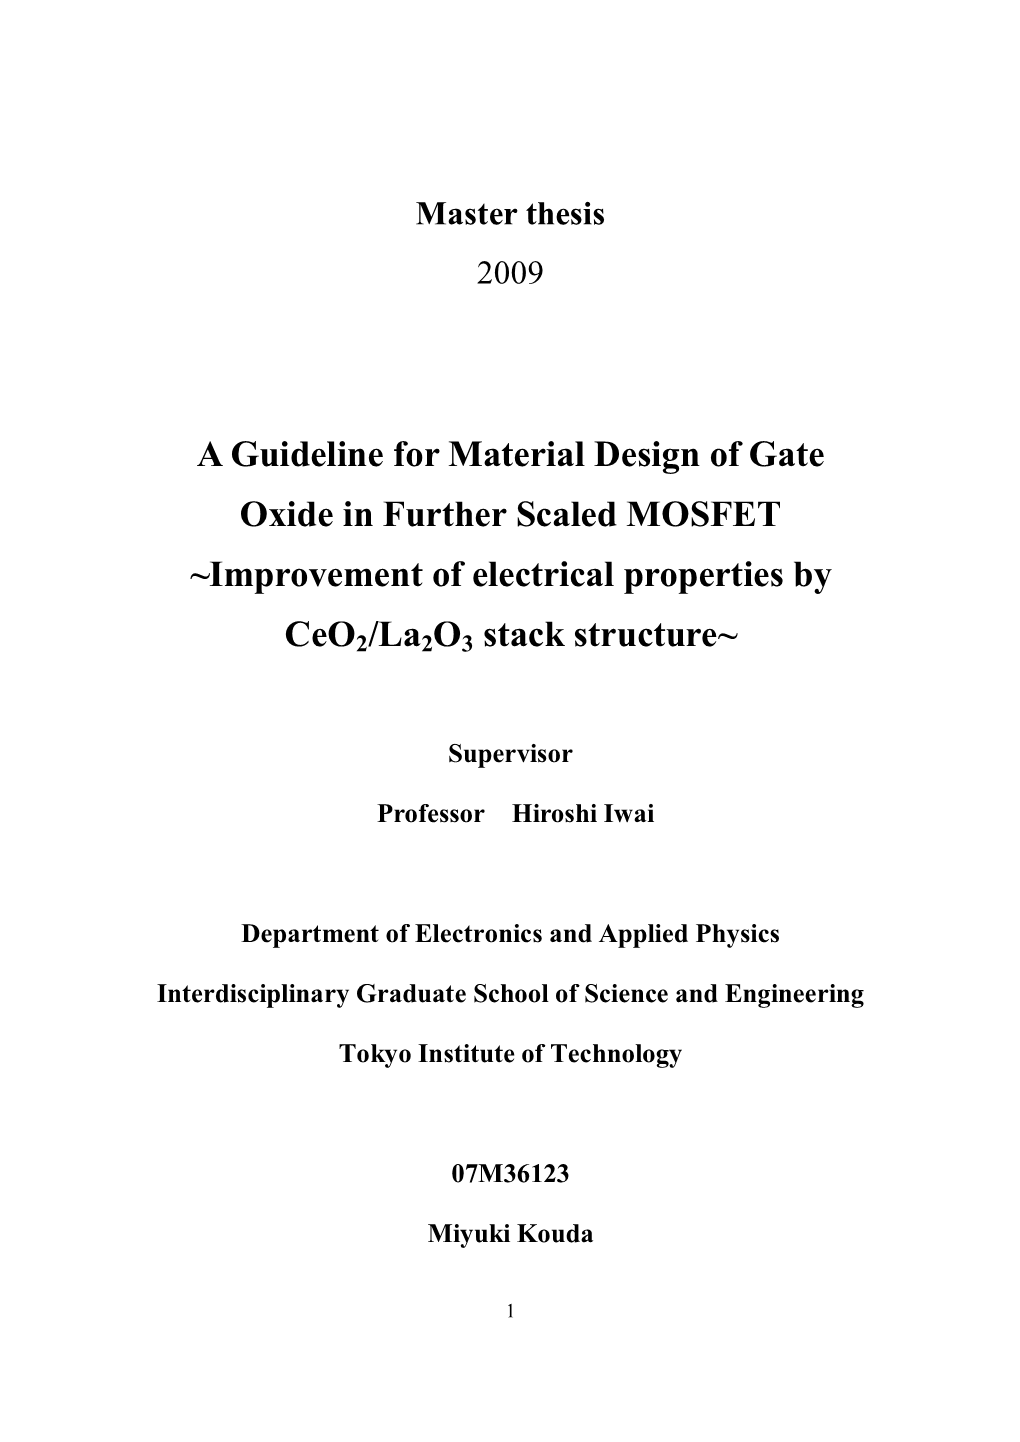 A Guideline for Material Design of Gate Oxide in Further Scaled MOSFET ~Improvement of Electrical Properties by Ceo2/La2o3 Stack